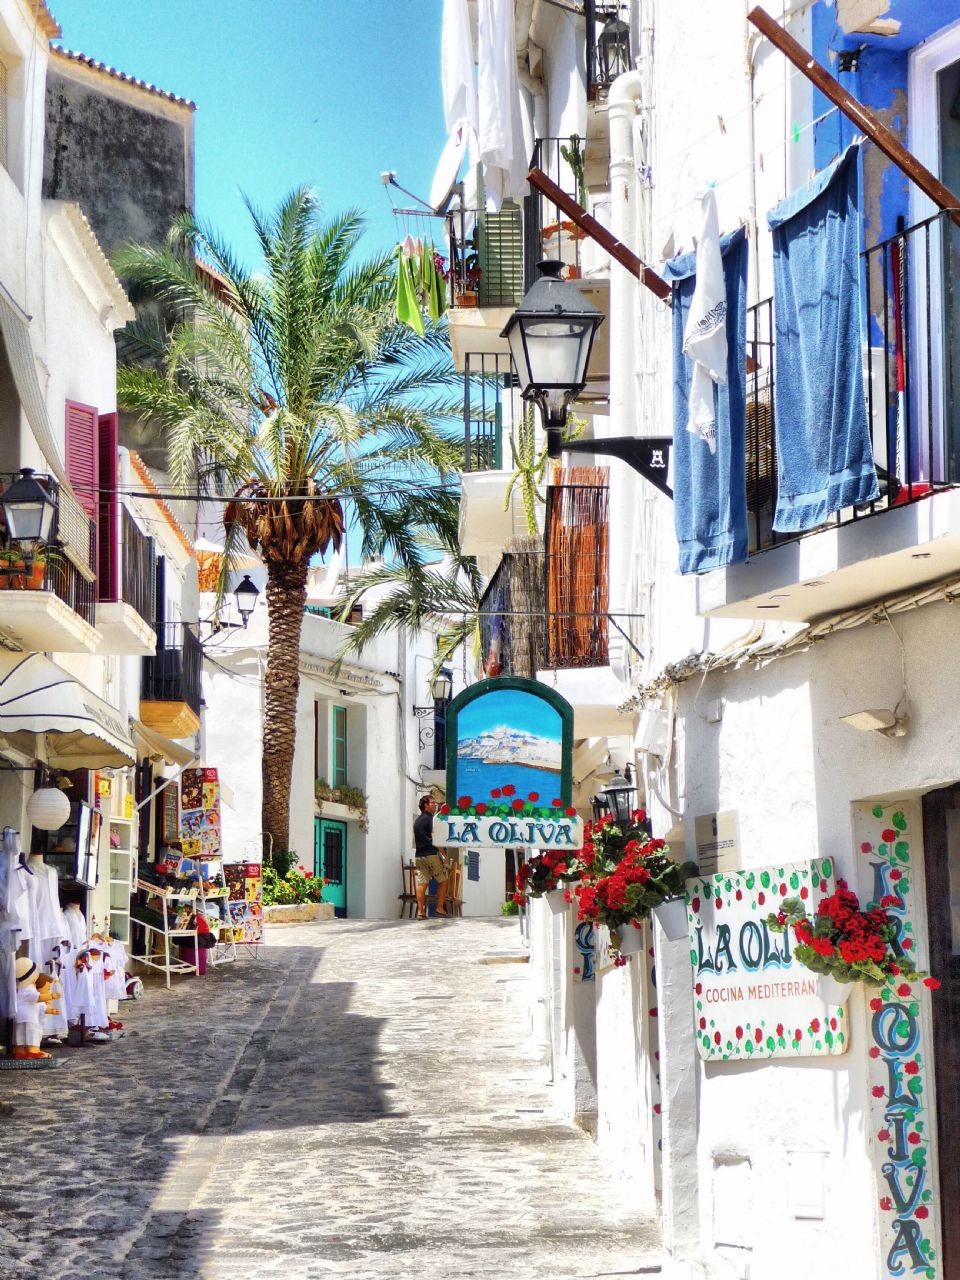 Ibiza Island has a rich history and culture that dates back to ancient times. One of the must-visit places on the island is the Old Town (Dalt Vila),